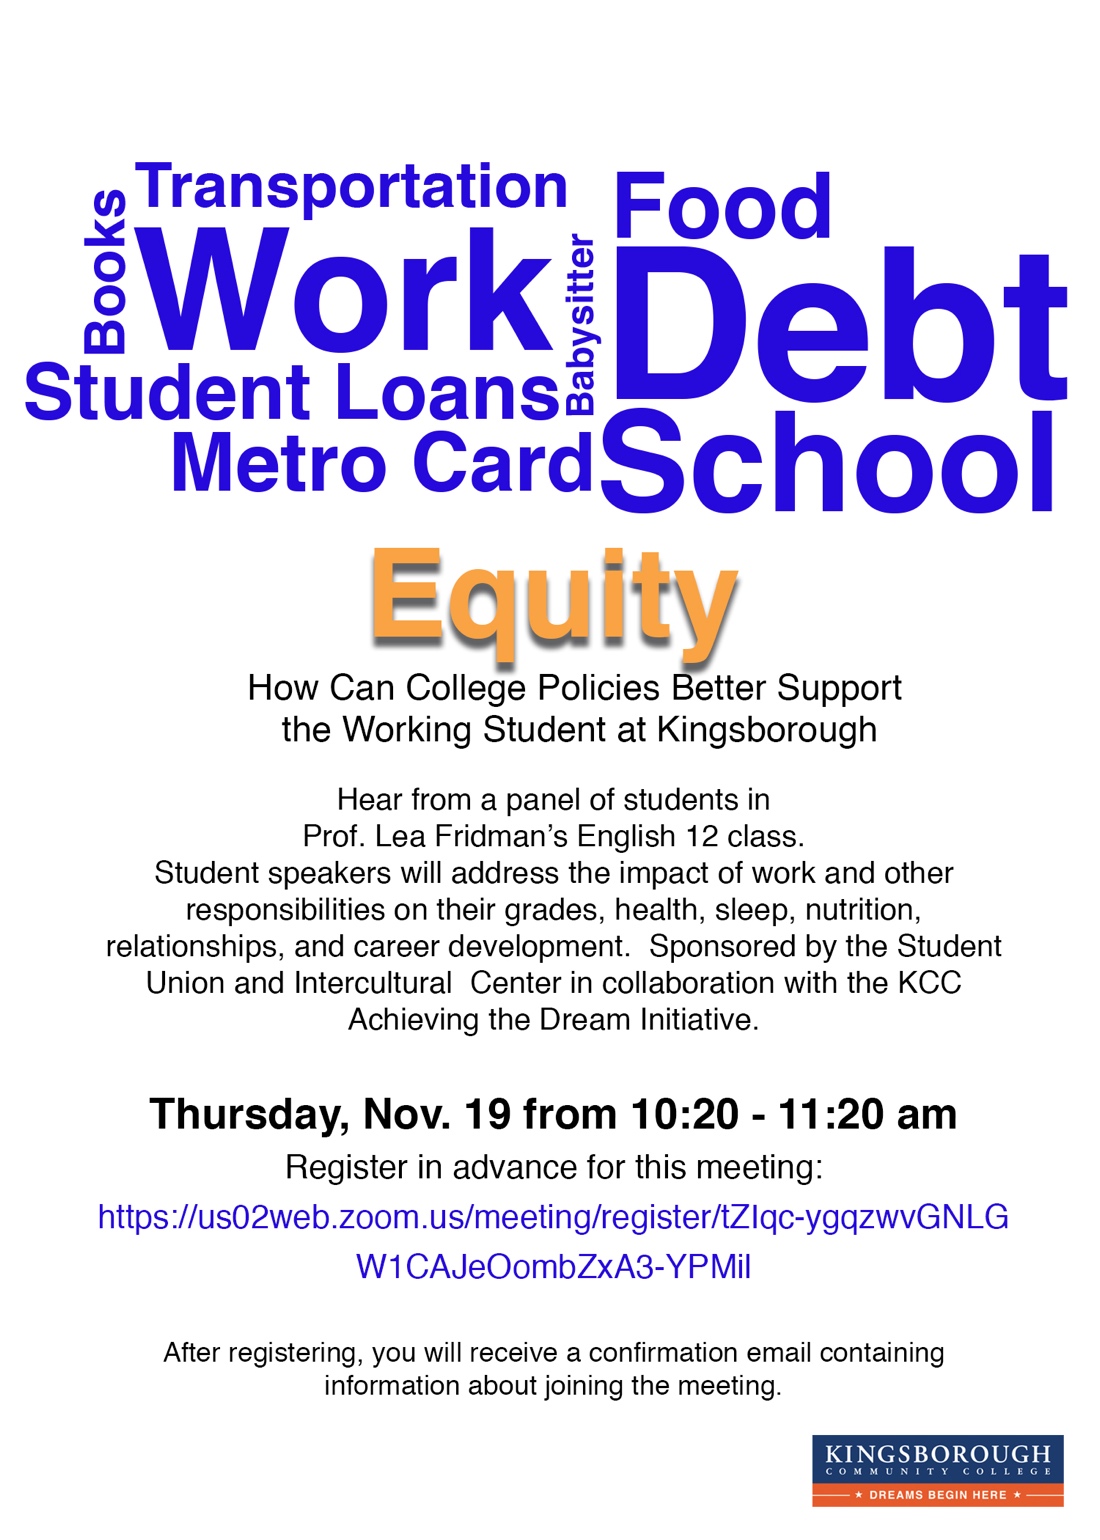 Equity event flyer